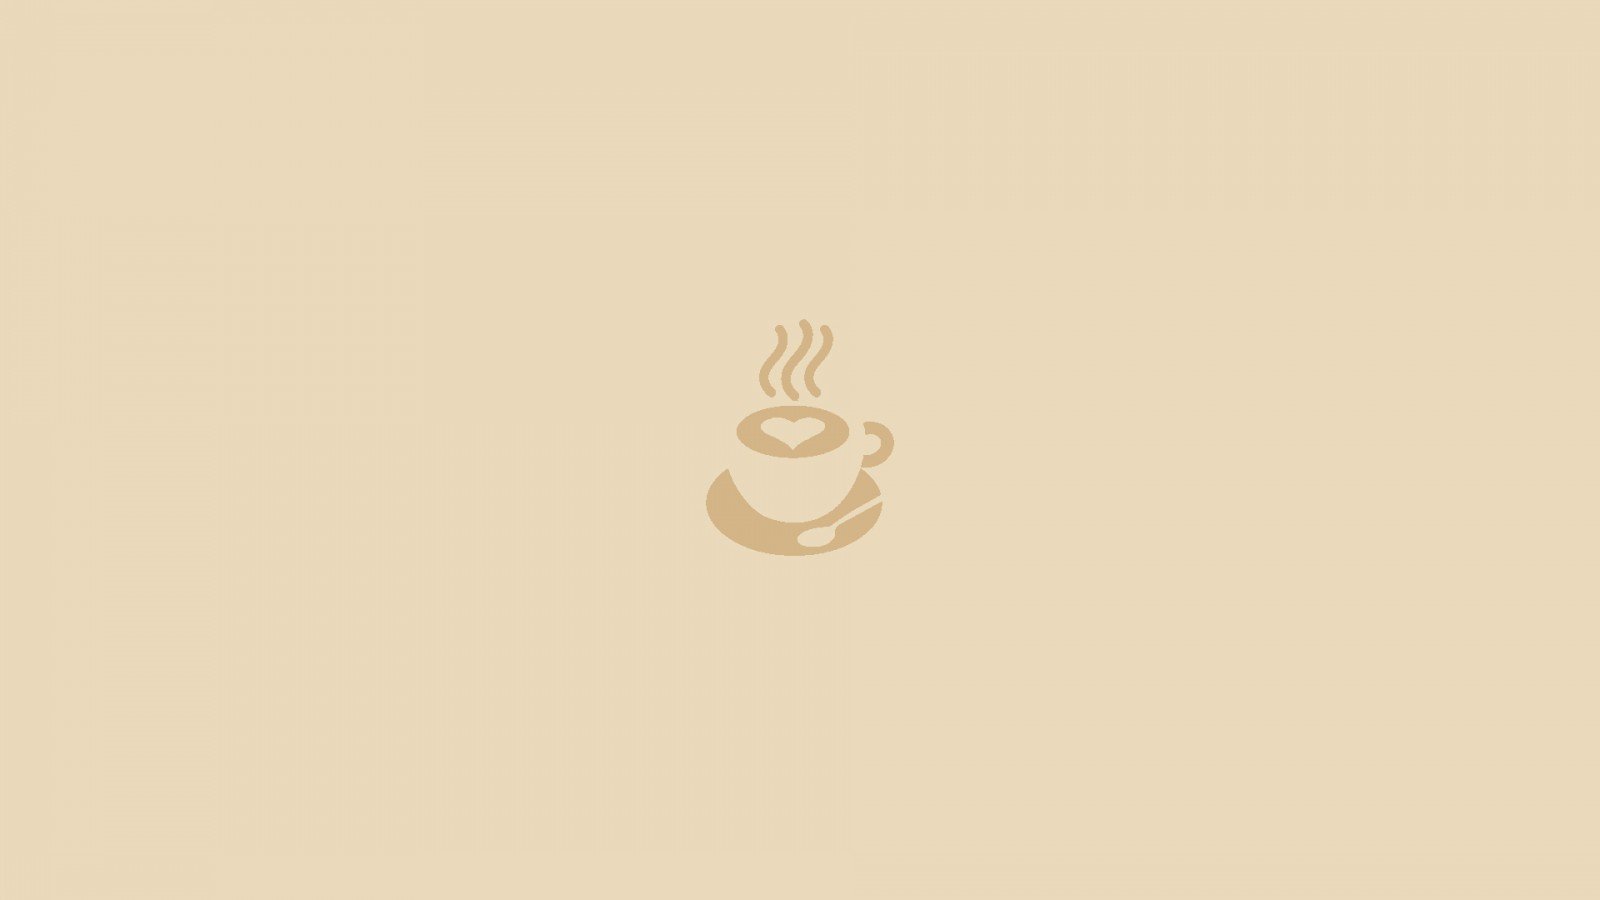 A minimalist coffee cup logo design for a cafe - Minimalist beige, minimalist